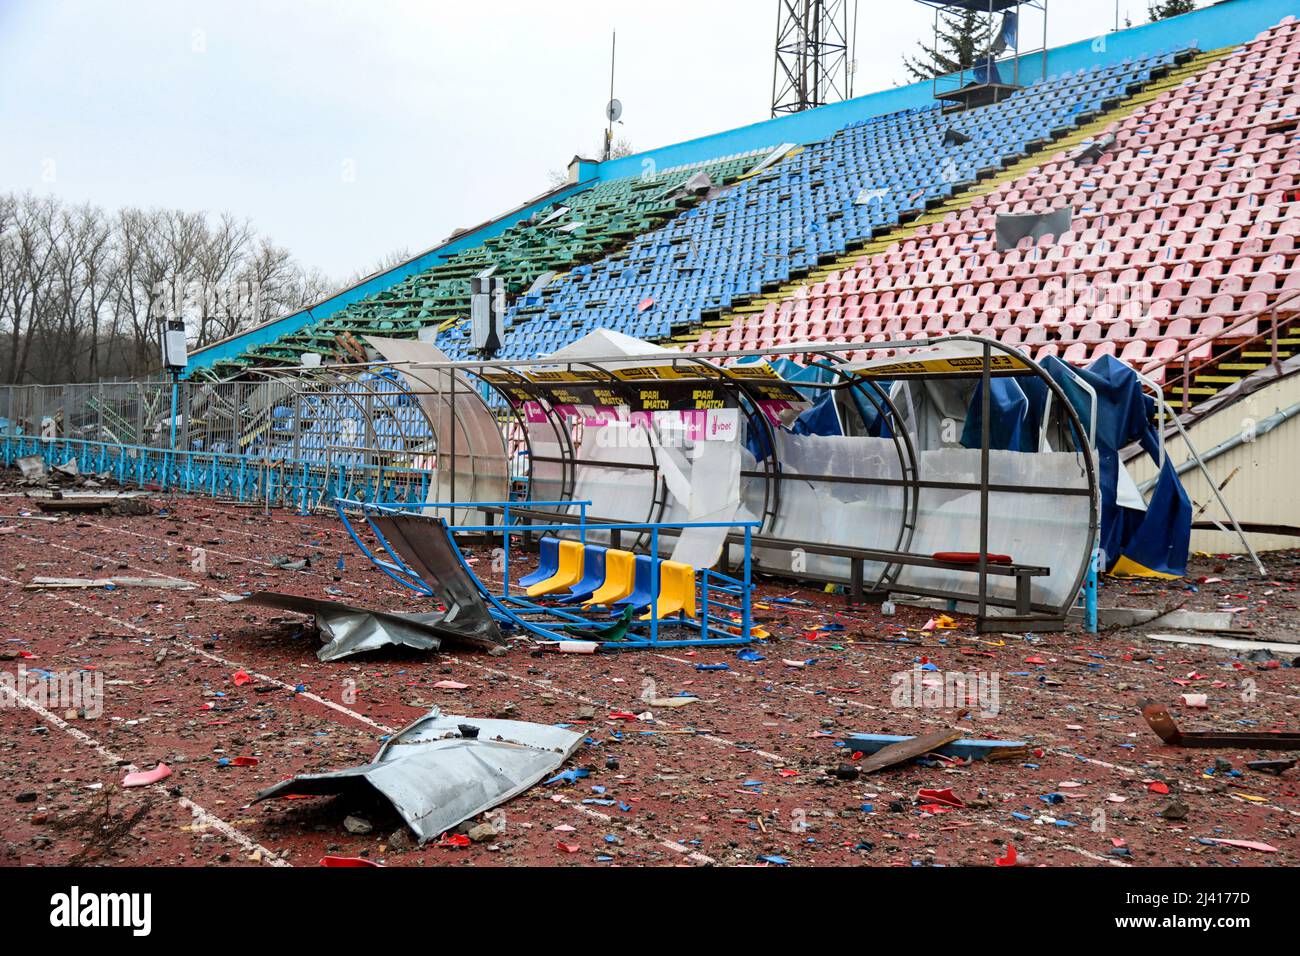 CHERNIHIV, UKRAINE - APRIL 9, 2022 - The damaged stands and tracks are pictured at the Chernihiv Olympic Sports Training Centre (formerly Yuri Gagarin Stock Photo